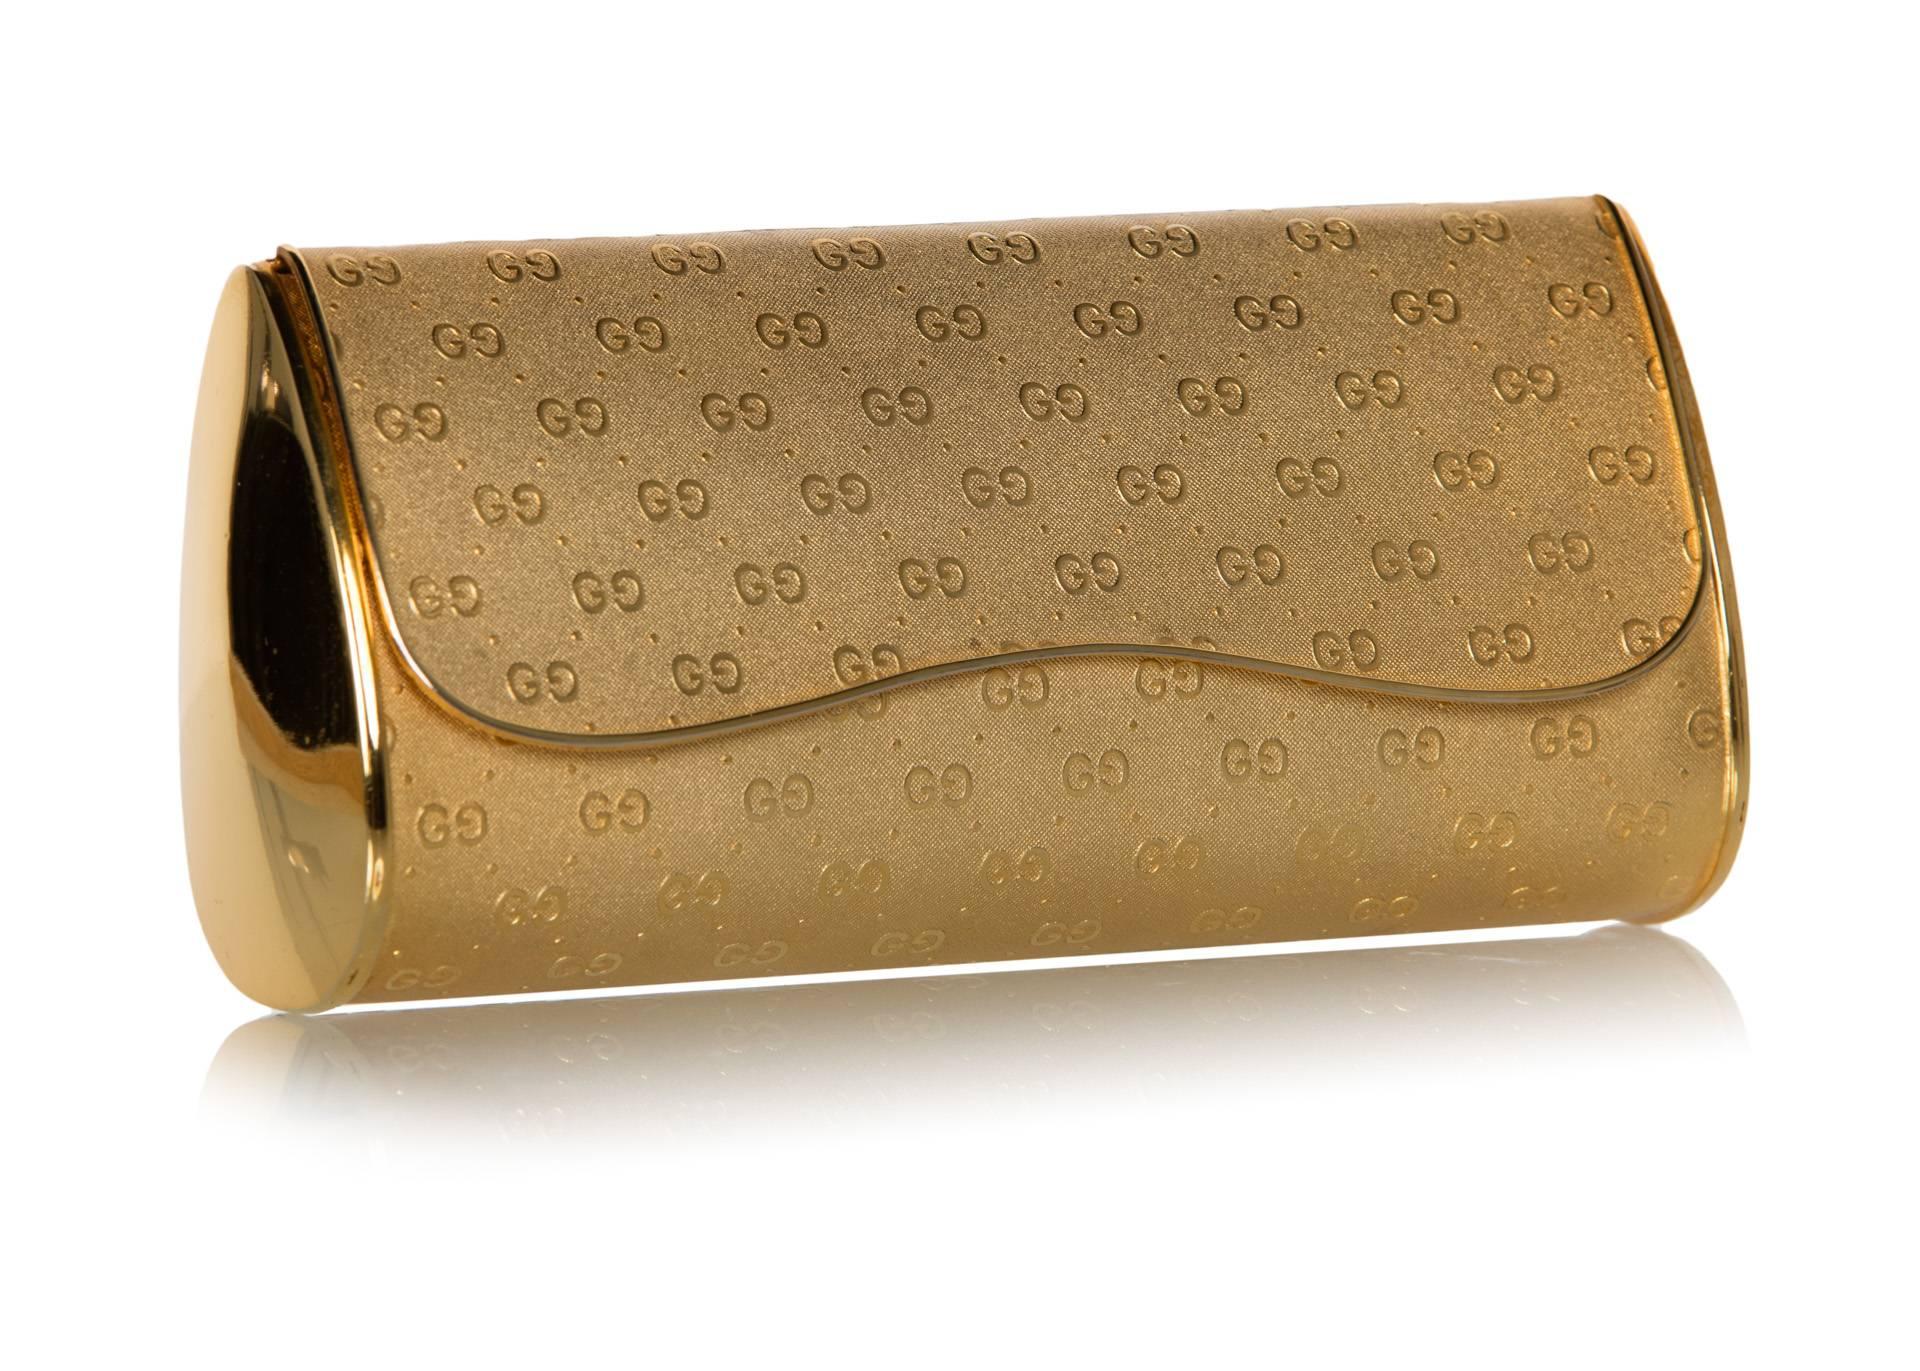 Before diamonds were a girl’s best friend, there was gold, and where there is a statement to be made, a tasteful dash of gold is sure not to disappoint. This gold metal Gucci clutch featuring their signature “GG” logo—popularized in the 1930s –